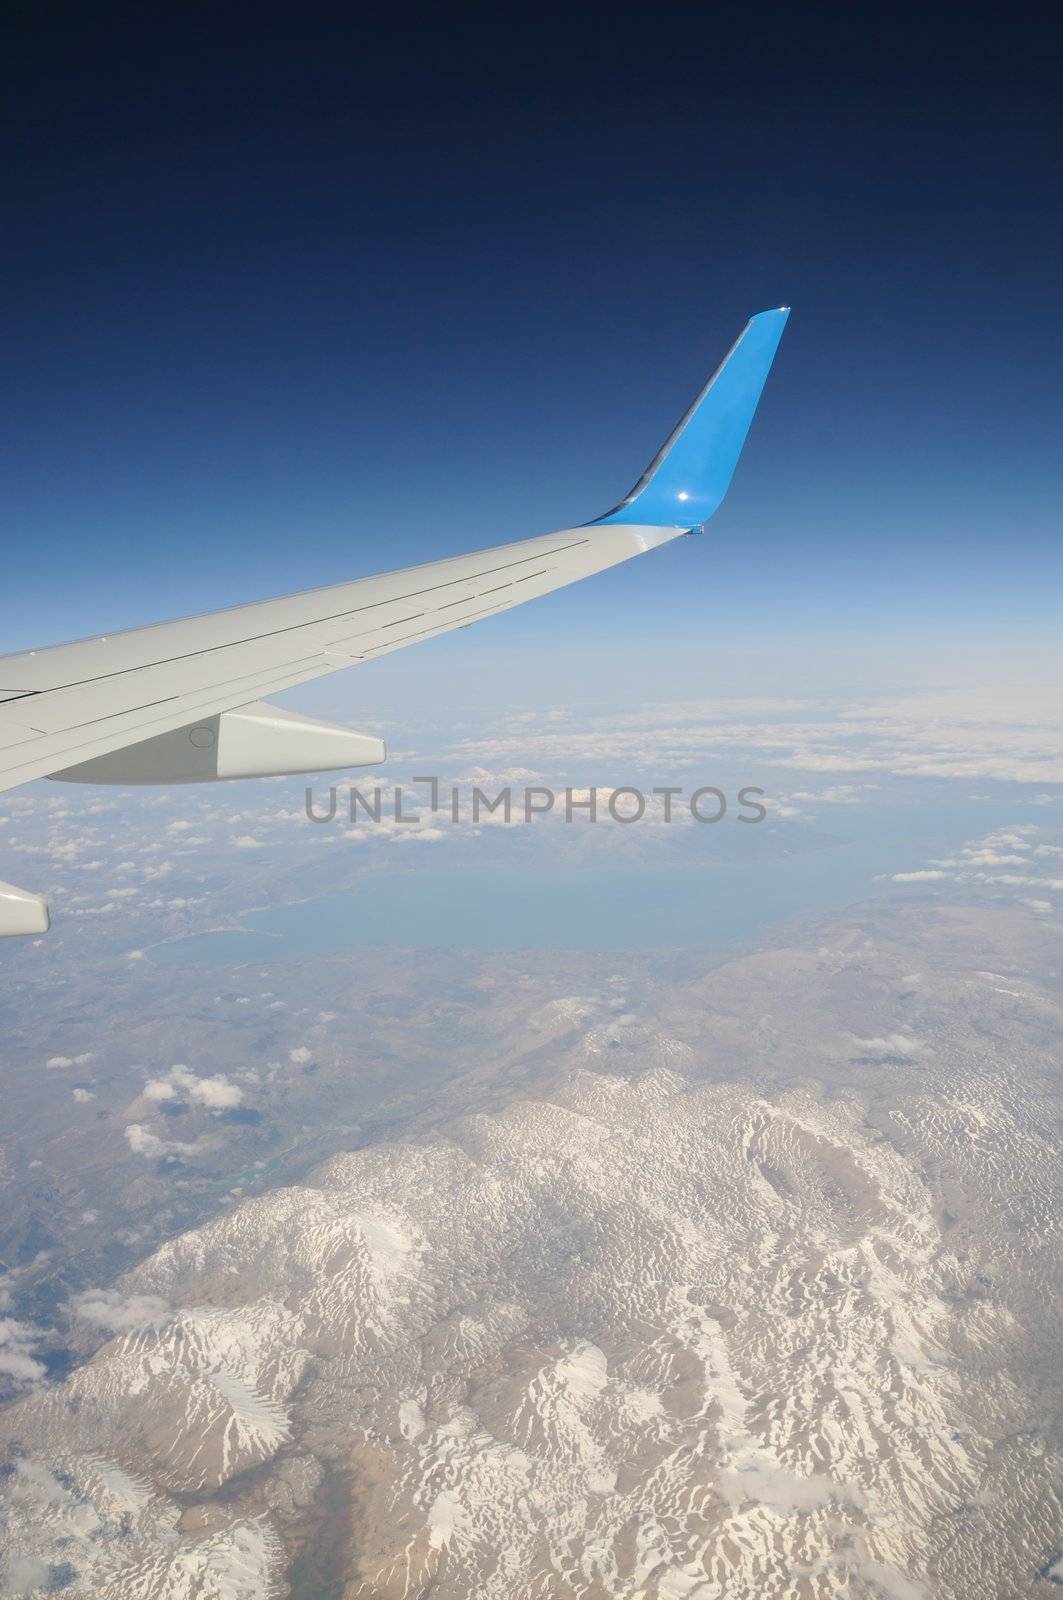 Airplane's wing under snow-covered mountains' peaks and lake